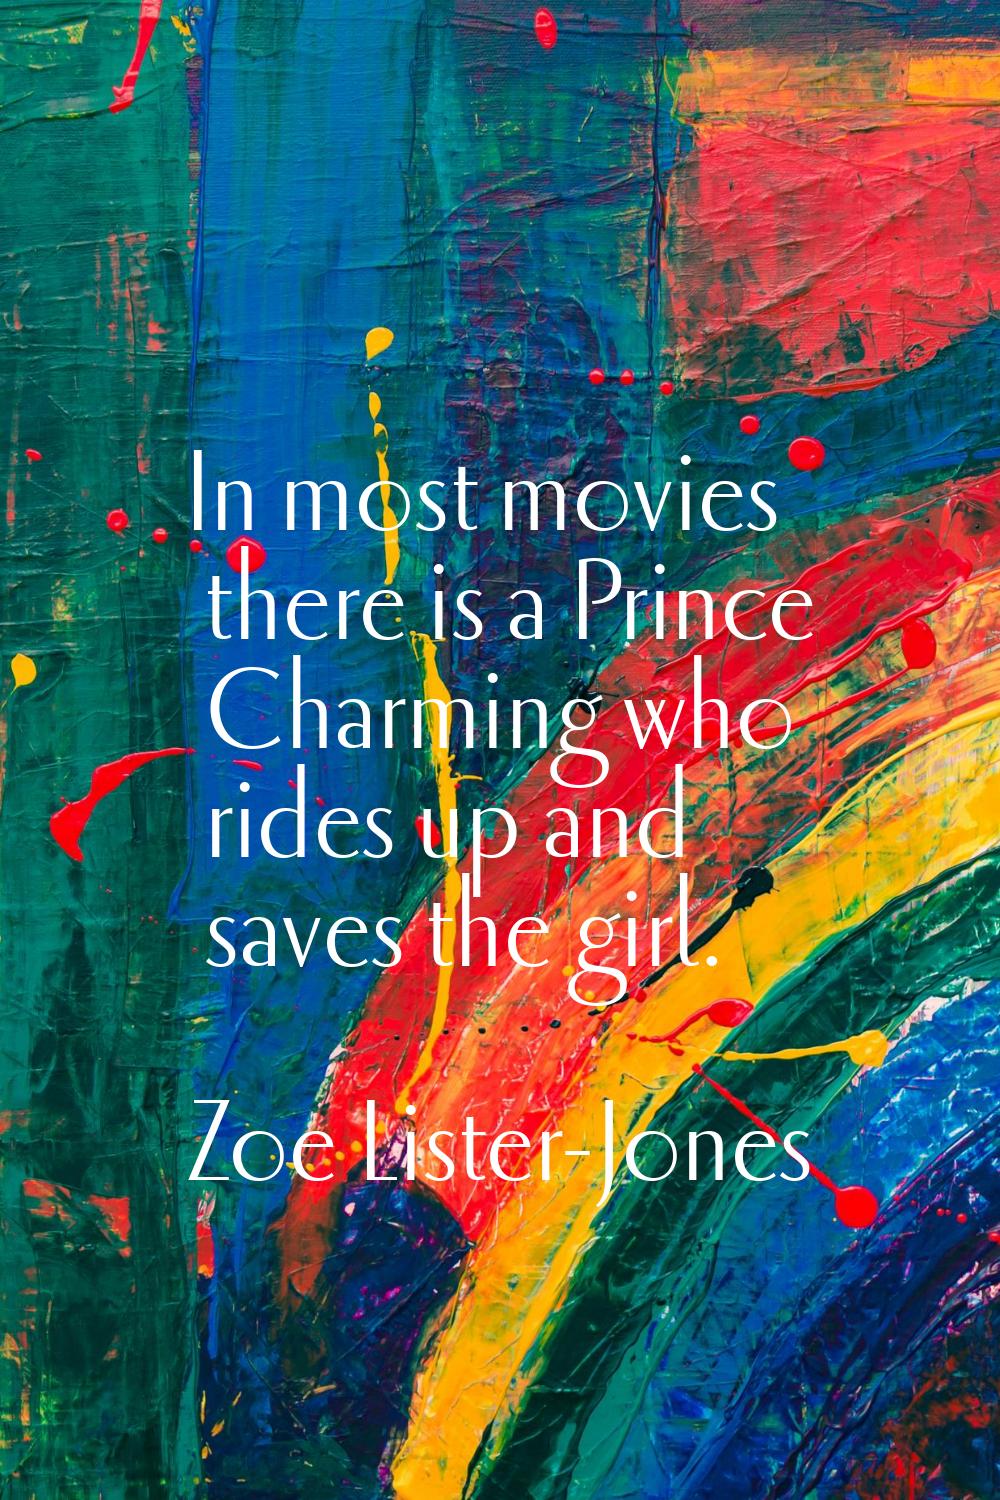 In most movies there is a Prince Charming who rides up and saves the girl.